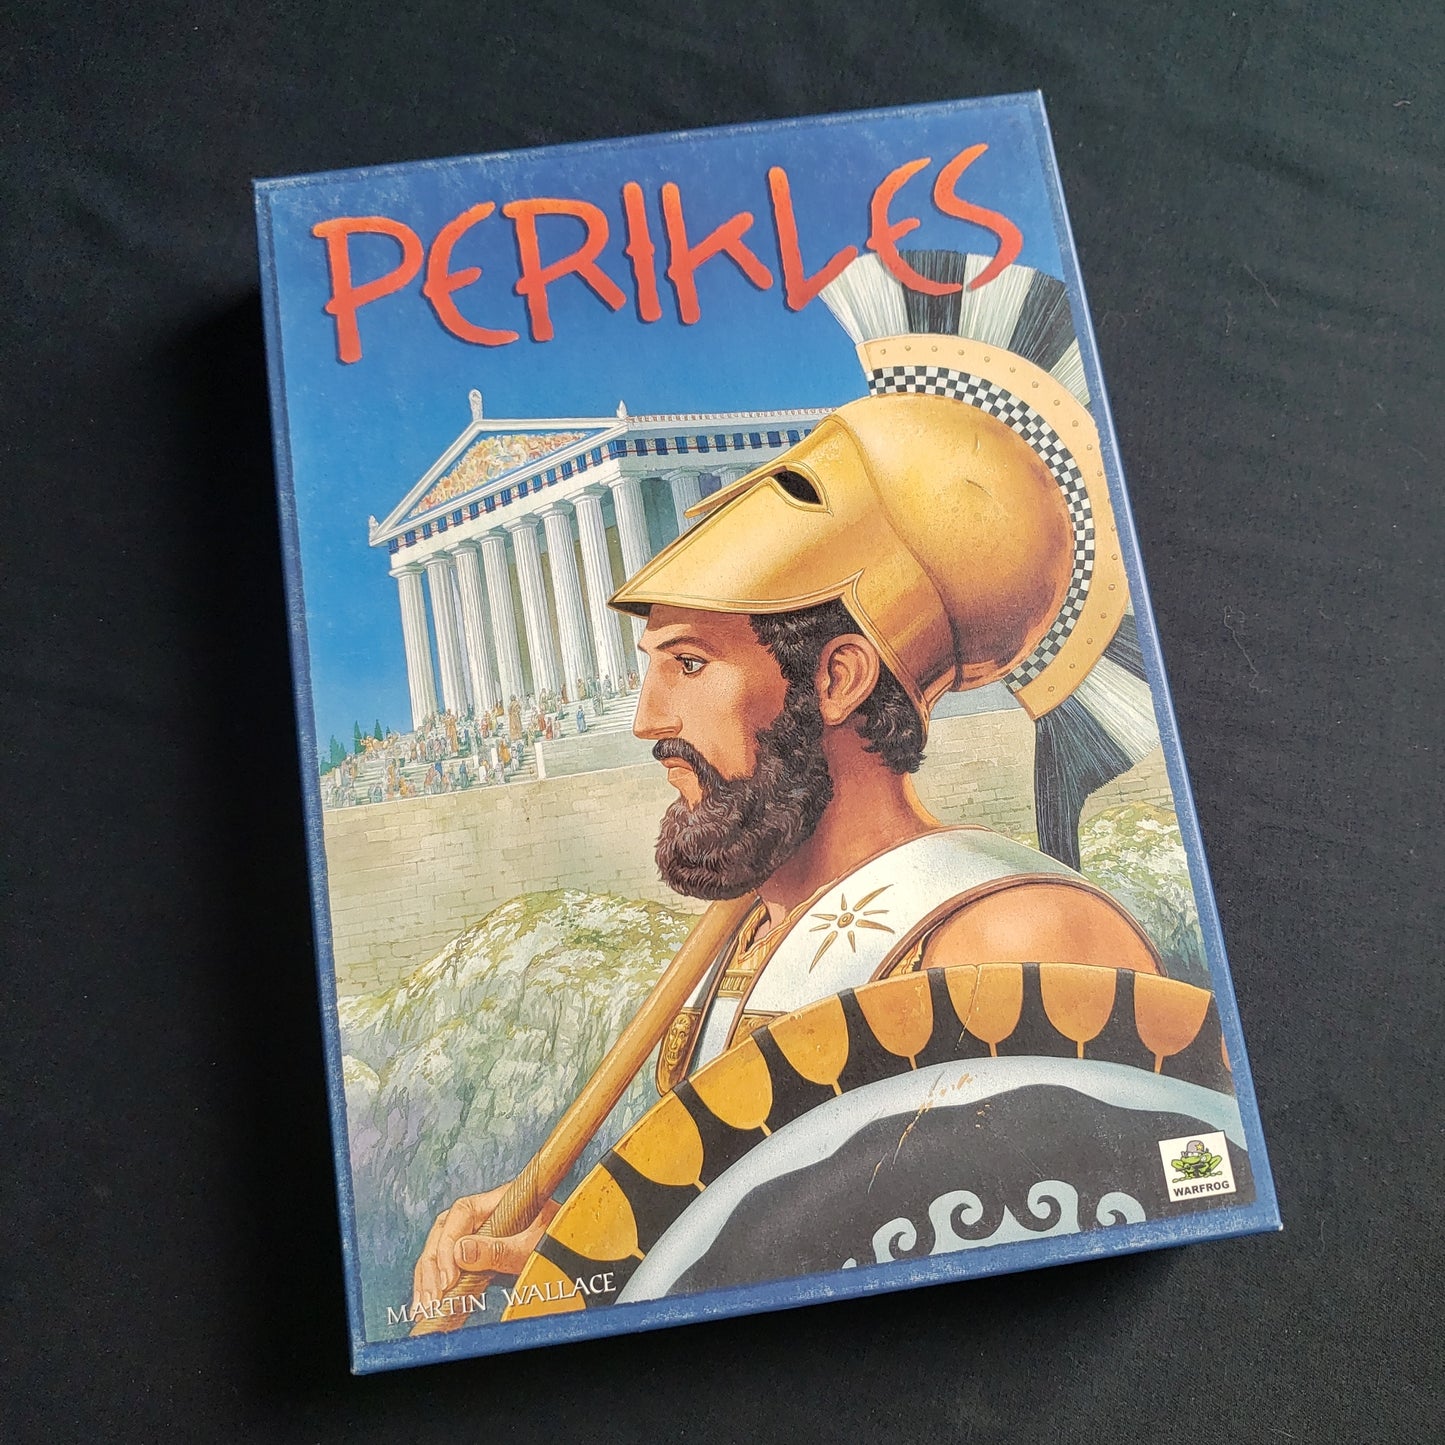 Image shows the front cover of the box of the Perikles board game